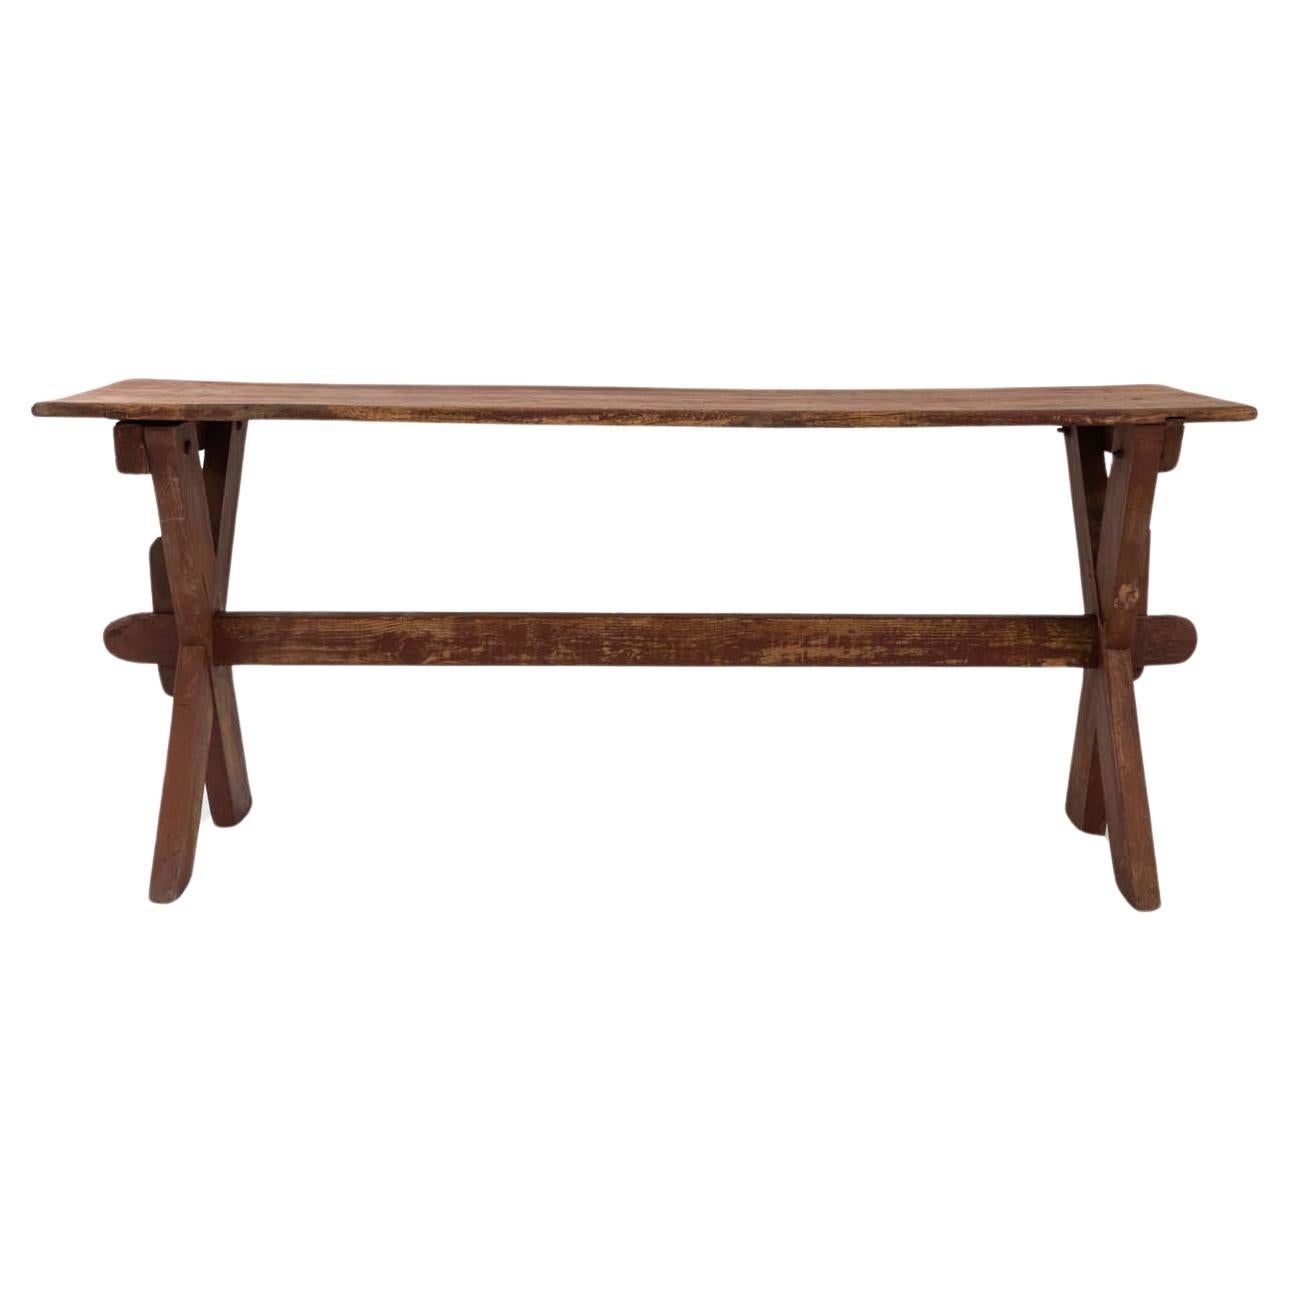 1900s Central European Wooden Table For Sale